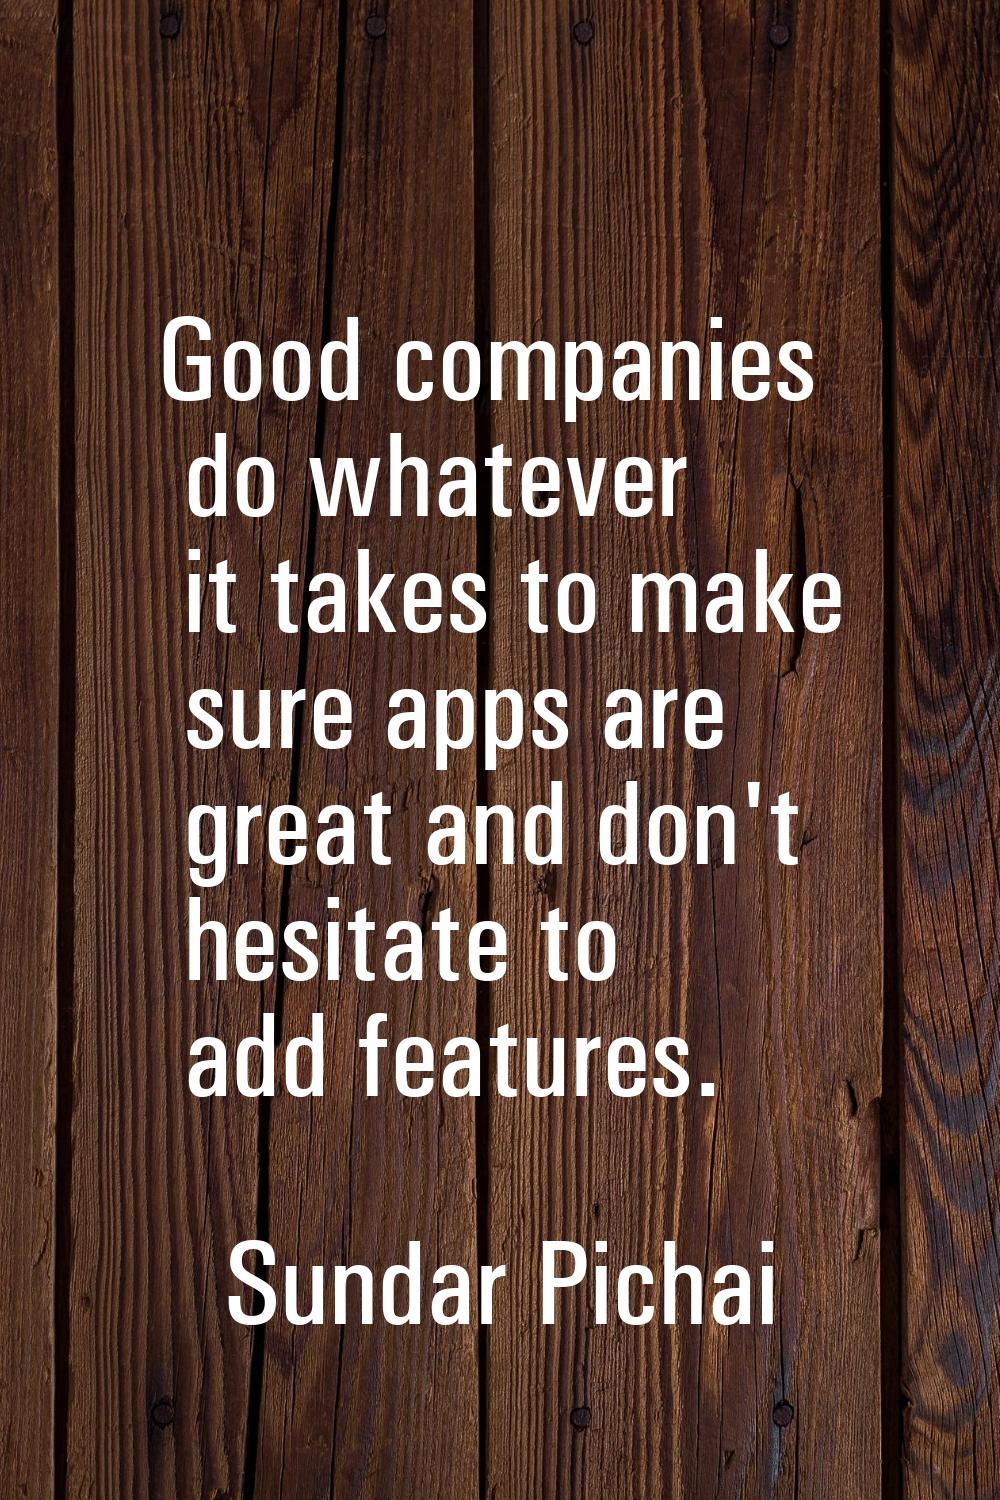 Good companies do whatever it takes to make sure apps are great and don't hesitate to add features.